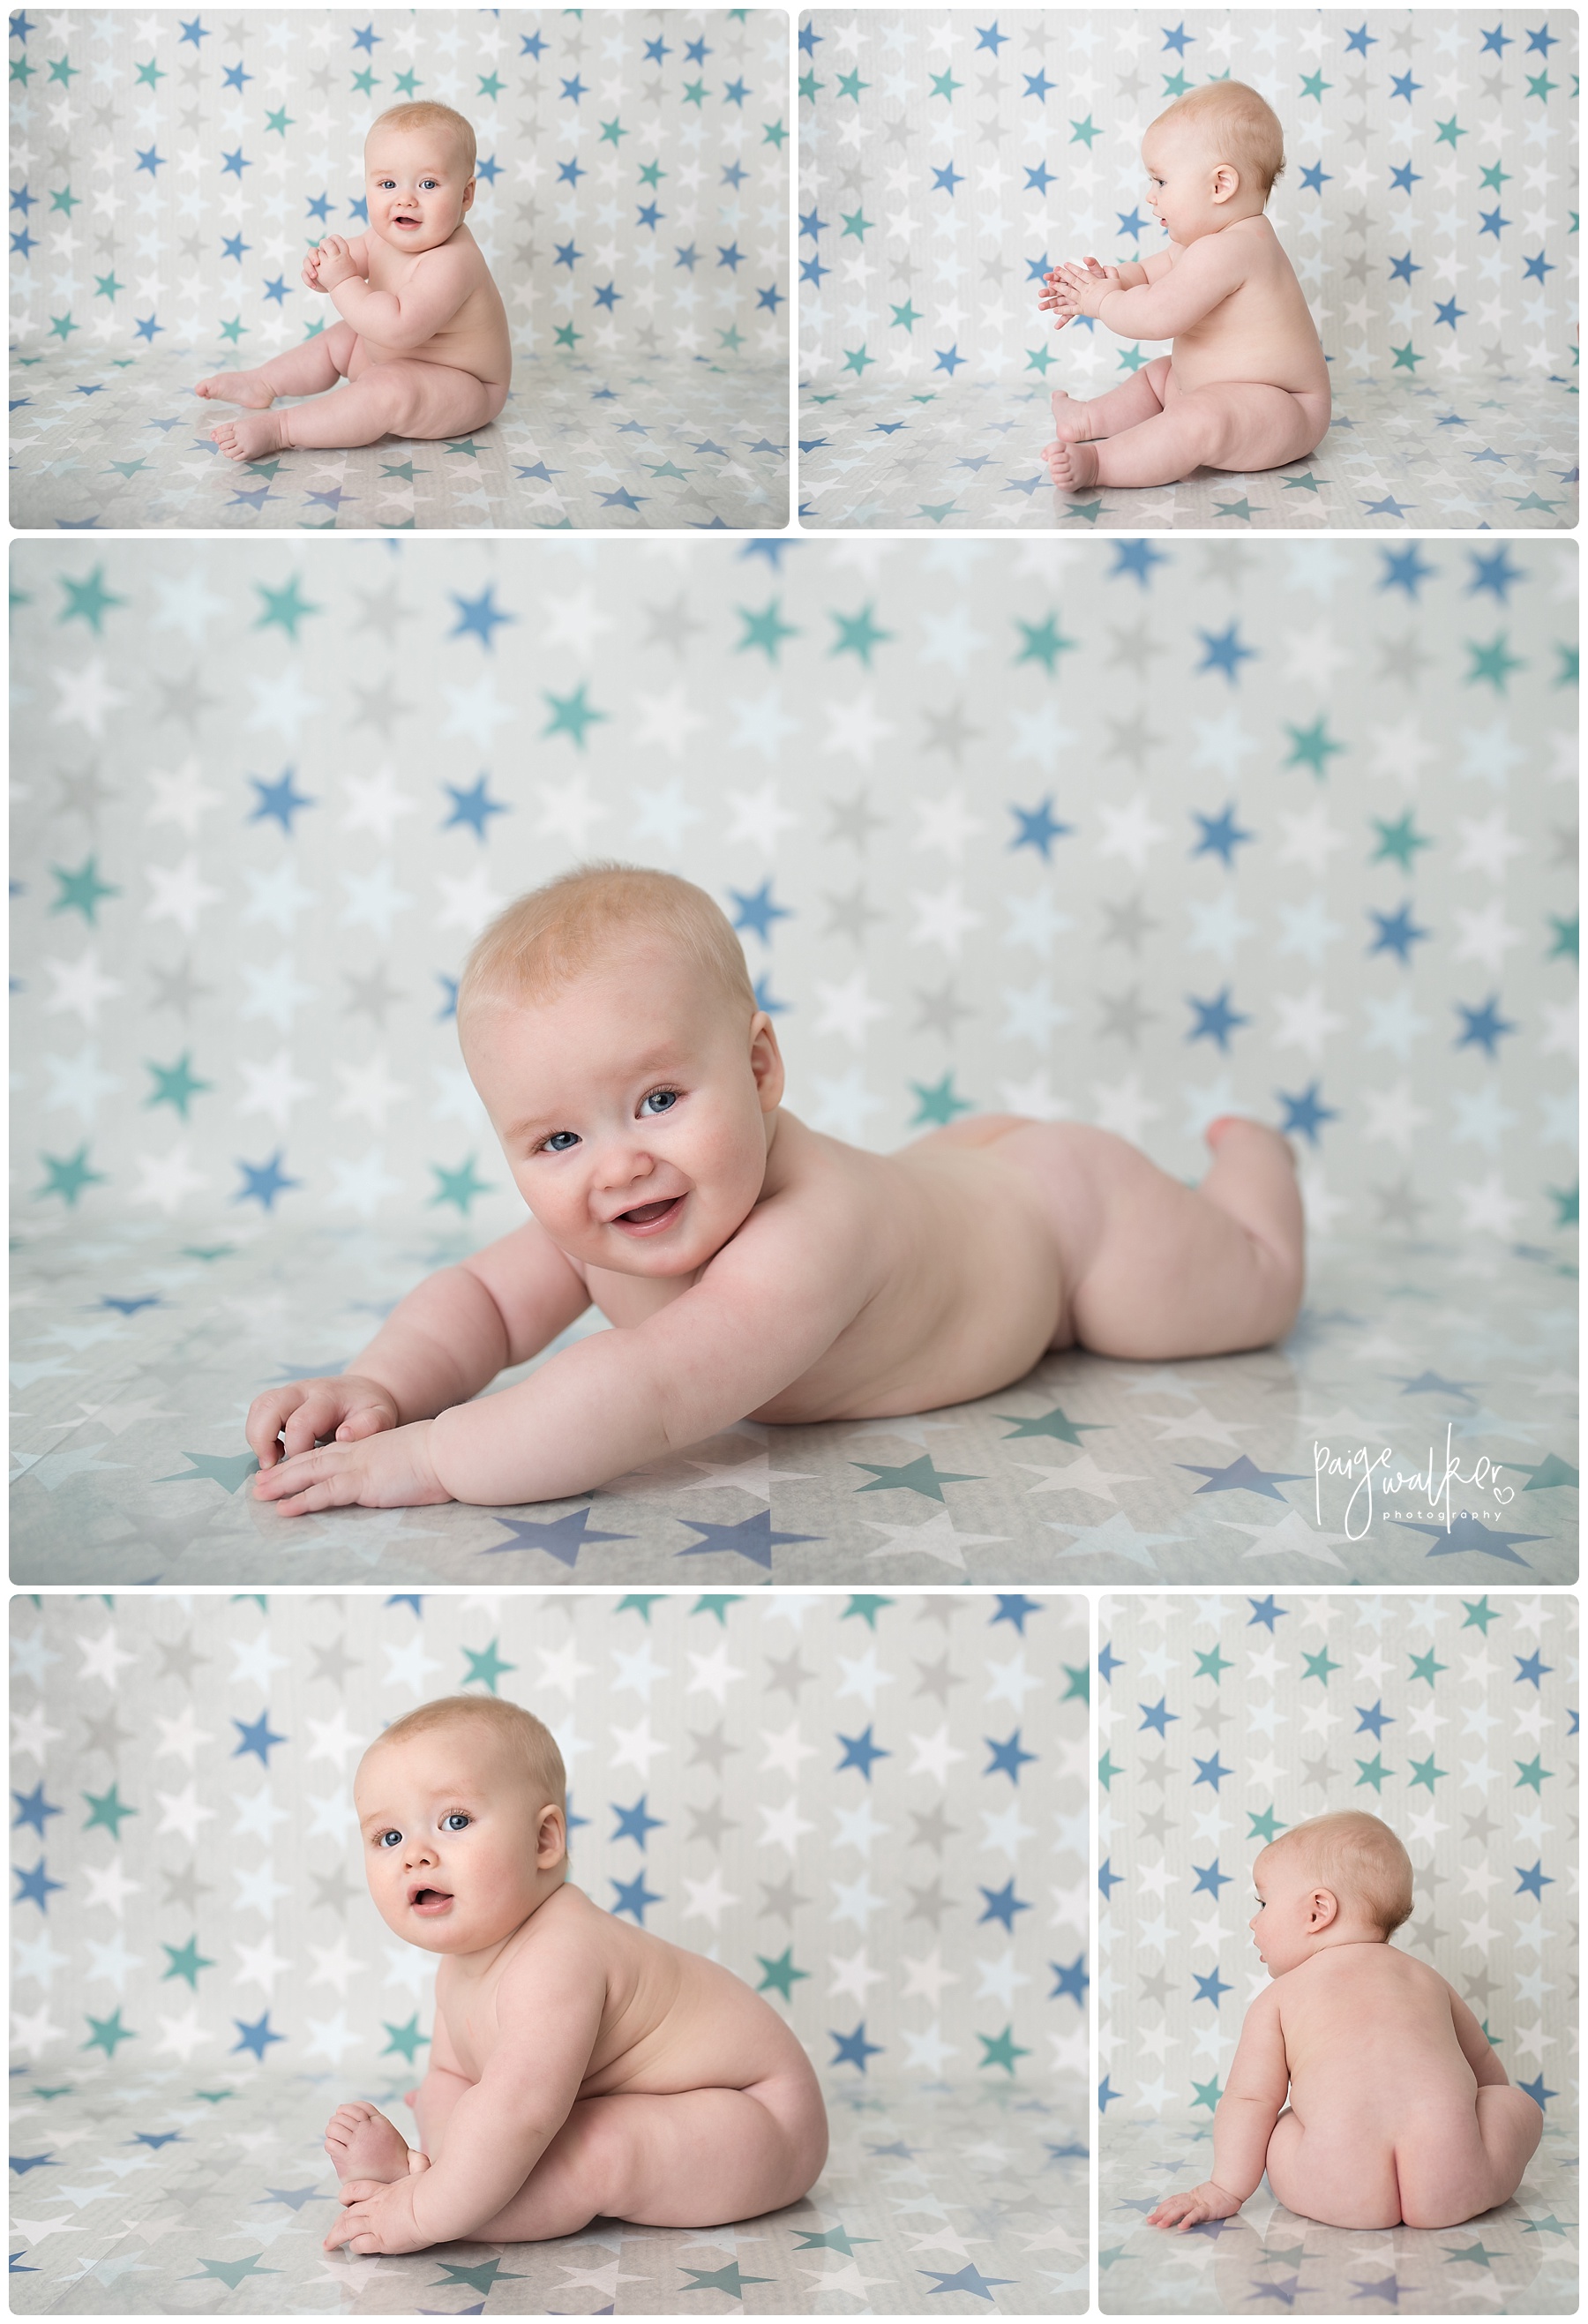 six month old laying naked